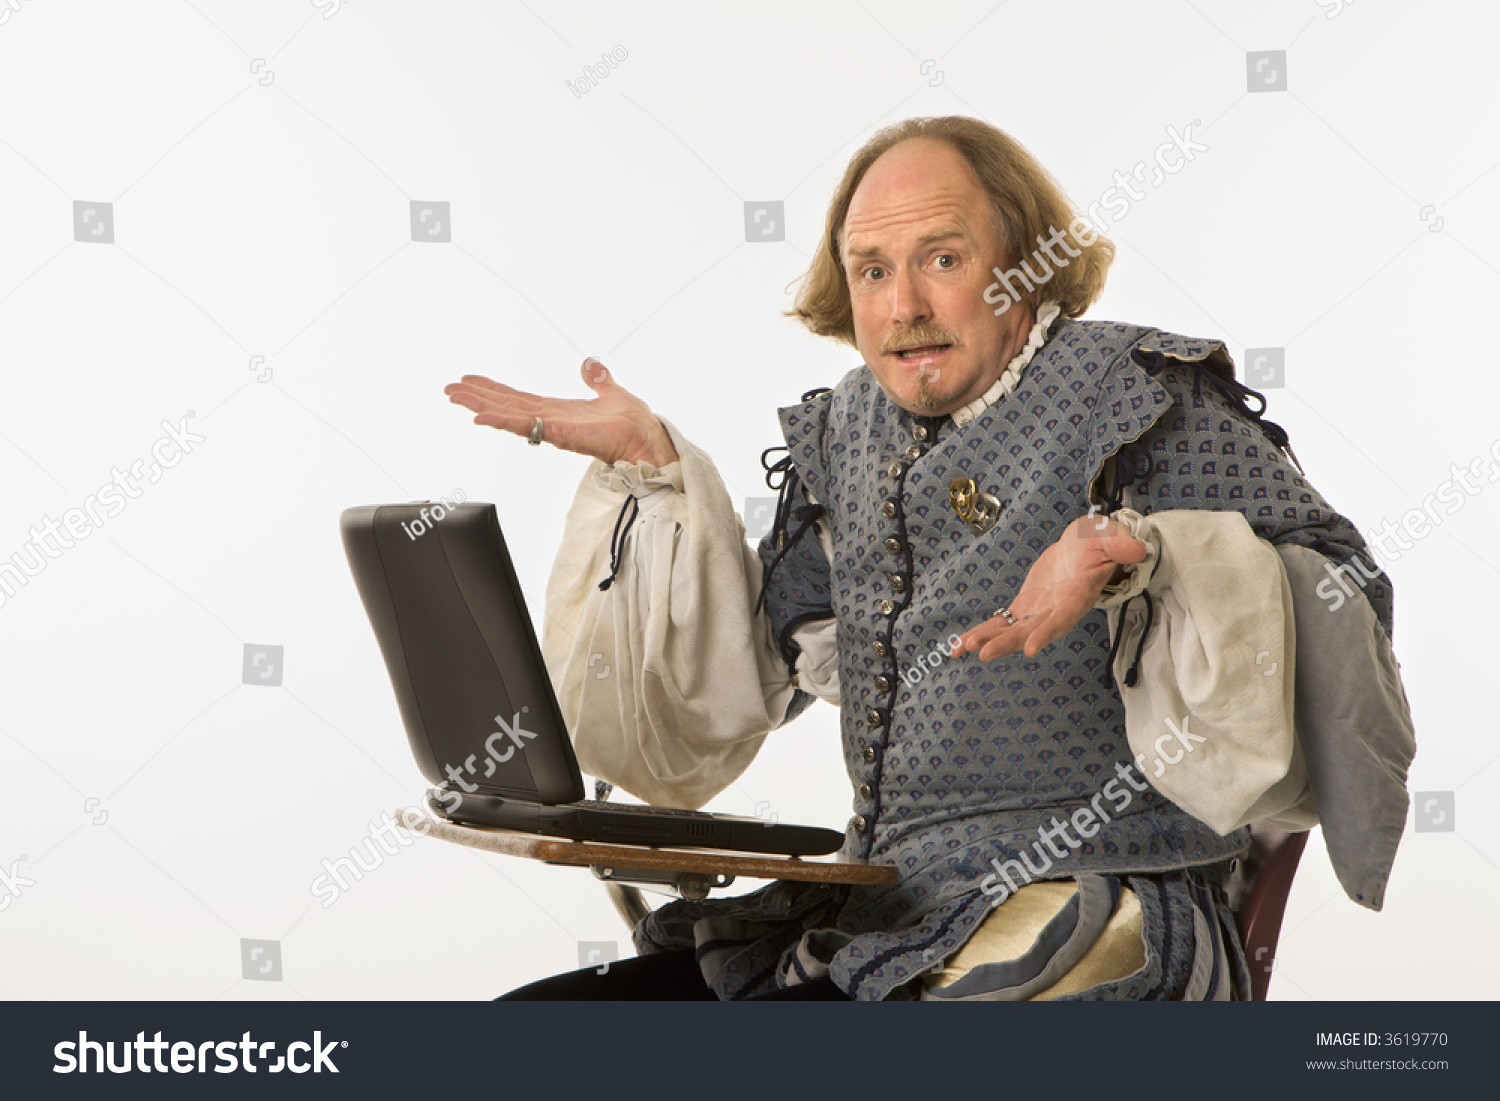 stock-photo-william-shakespeare-in-period-clothing-sitting-in-school-desk-with-laptop-computer-shrugging-at-3619770.jpg